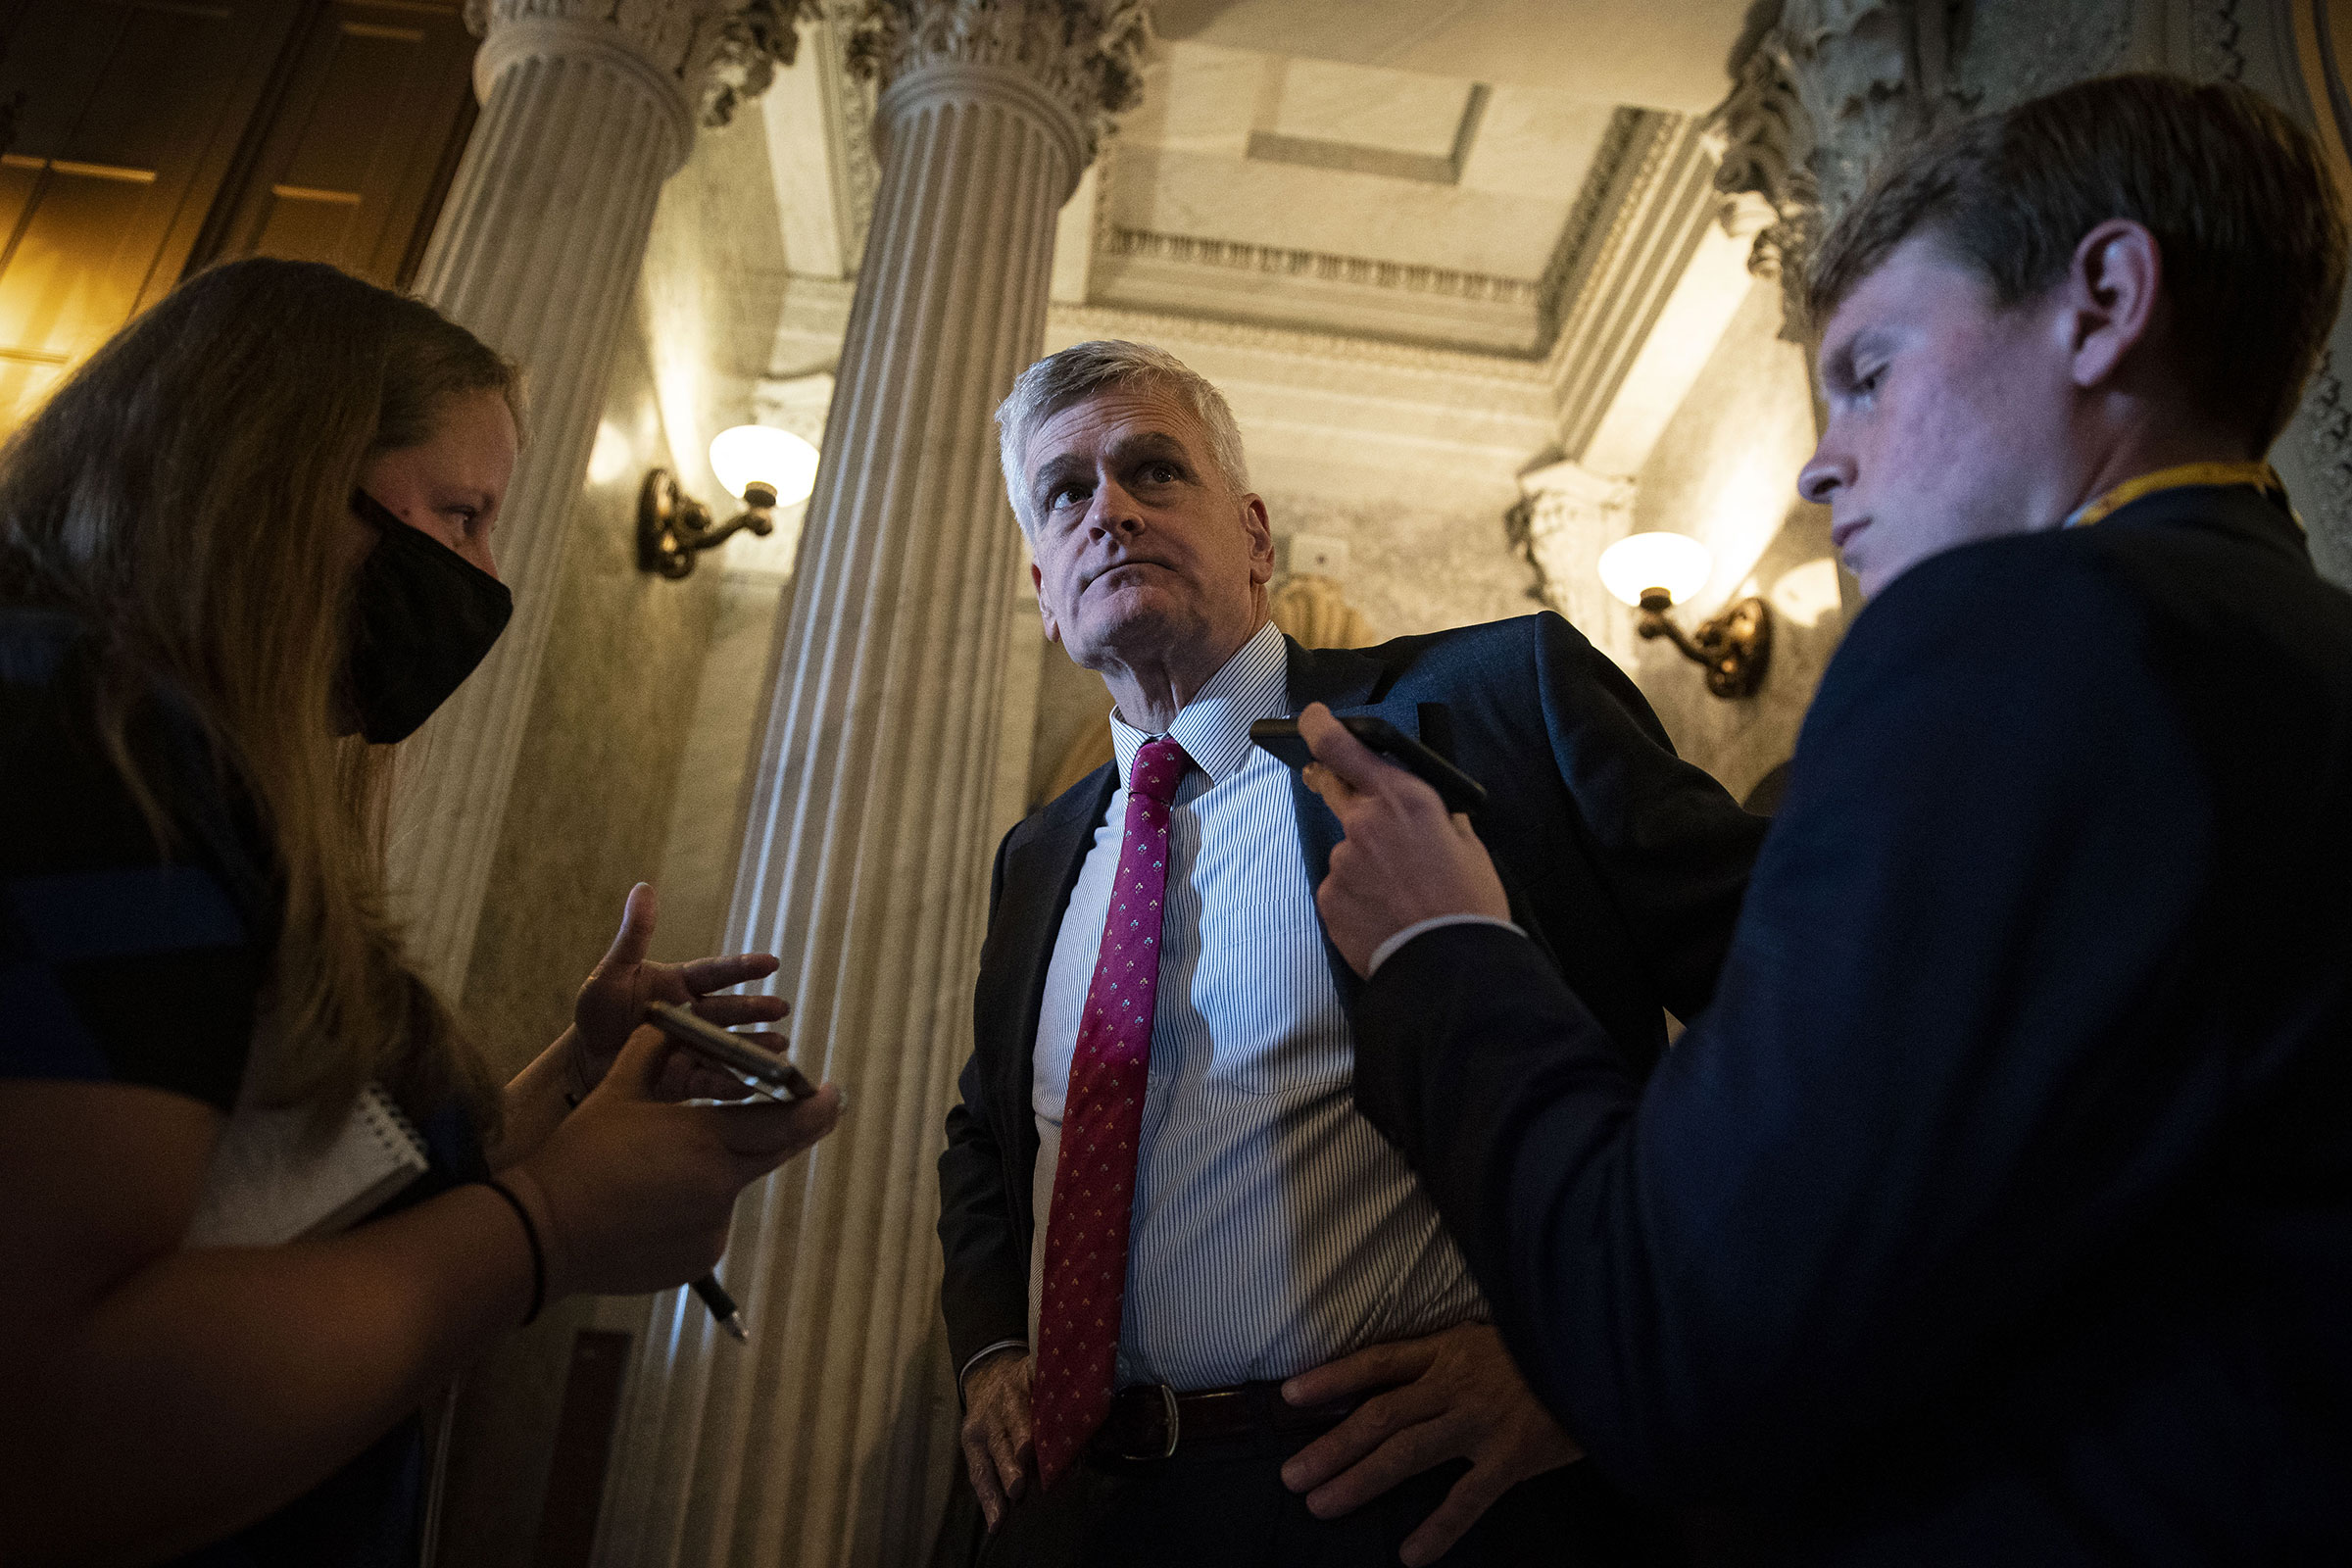 Senator Bill Cassidy, a Republican from Louisiana, speaks with members of the media at the U.S. Capitol in Washington, D.C., U.S., on Wednesday, Aug. 4, 2021. (Al Drago—Bloomberg/Getty Images)